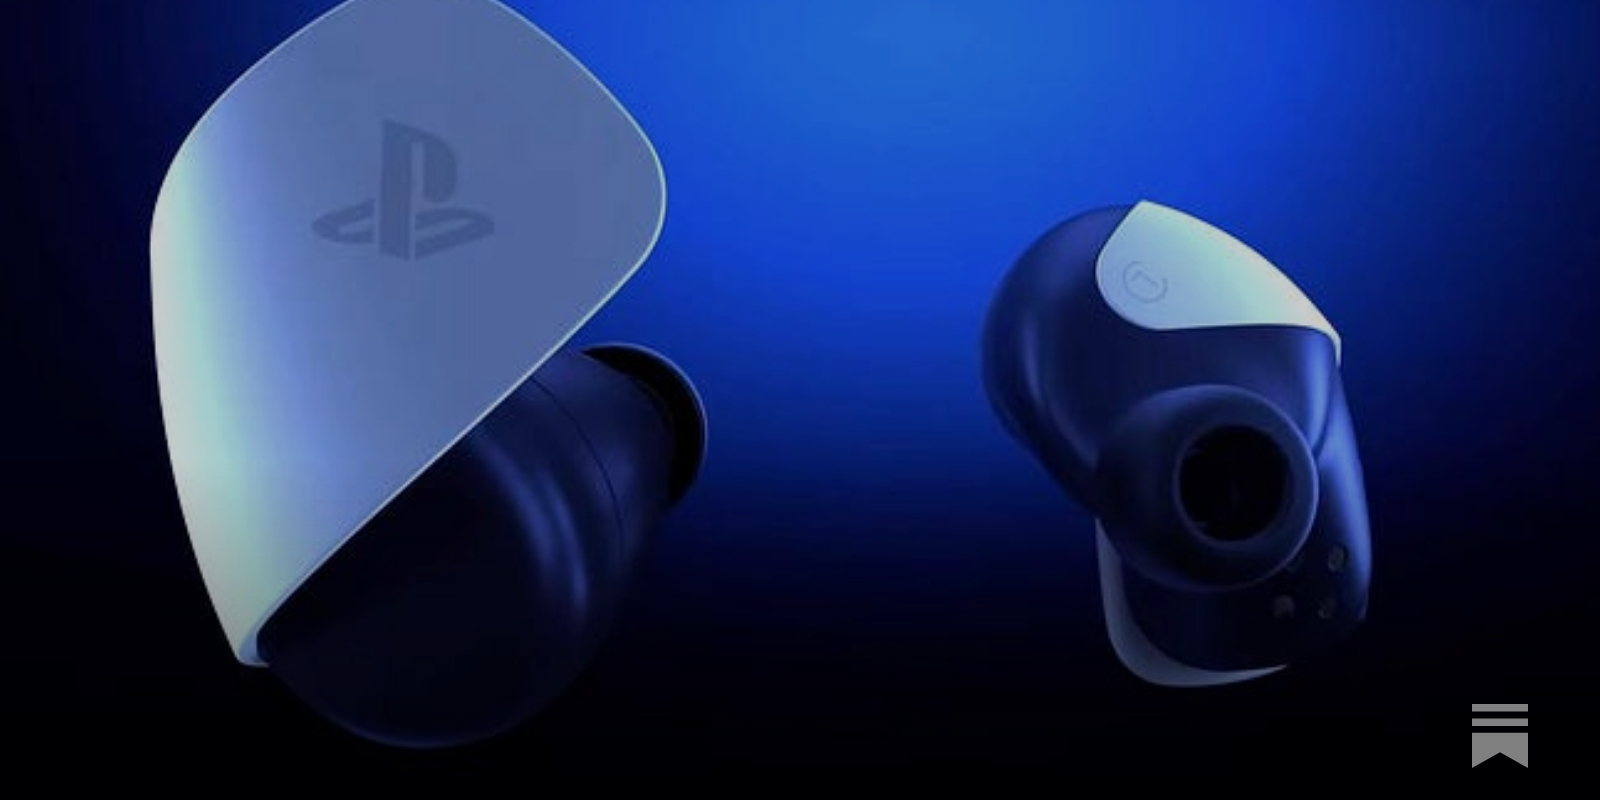 PlayStation Earbuds for PS5: price, release date, restock alerts and  everything you need to know